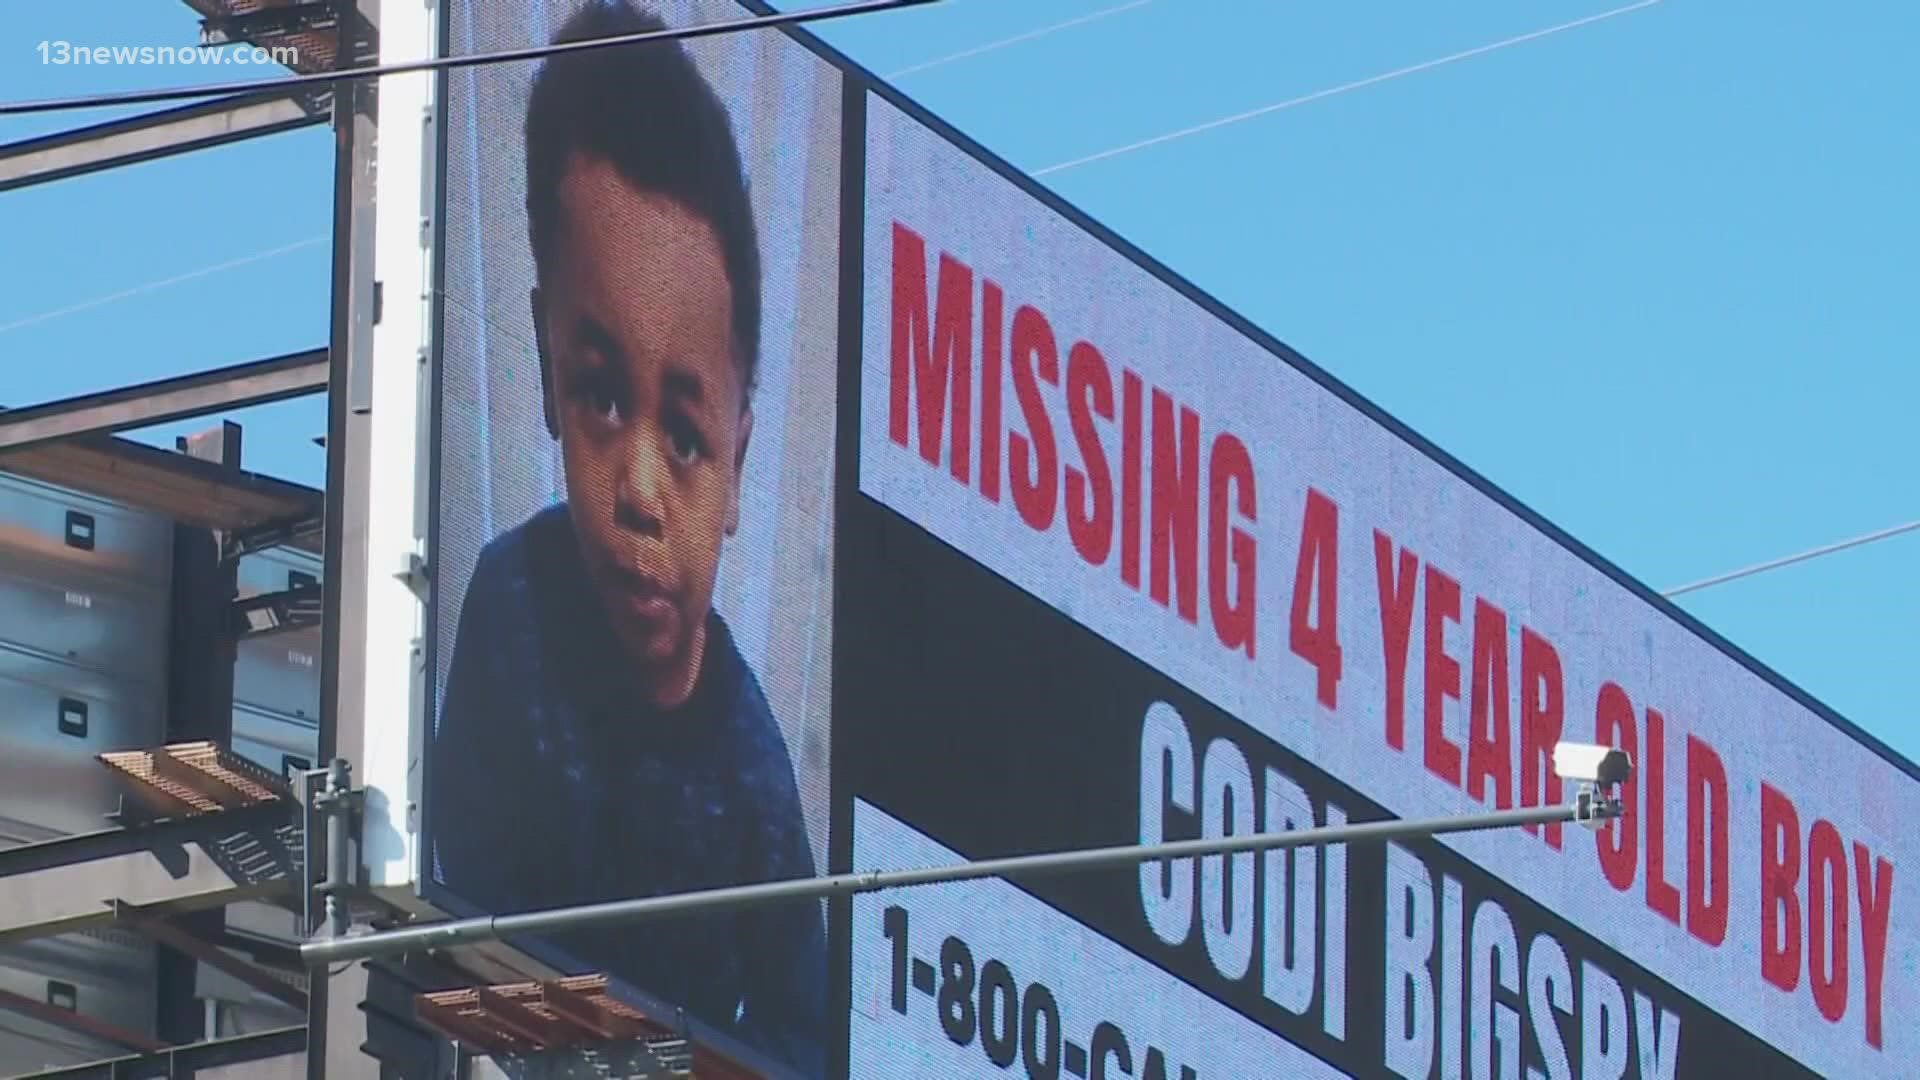 The 4-year-old has been missing from his Hampton home for almost two weeks. His father, Cory Bigsby, is behind bars on unrelated child neglect charges.